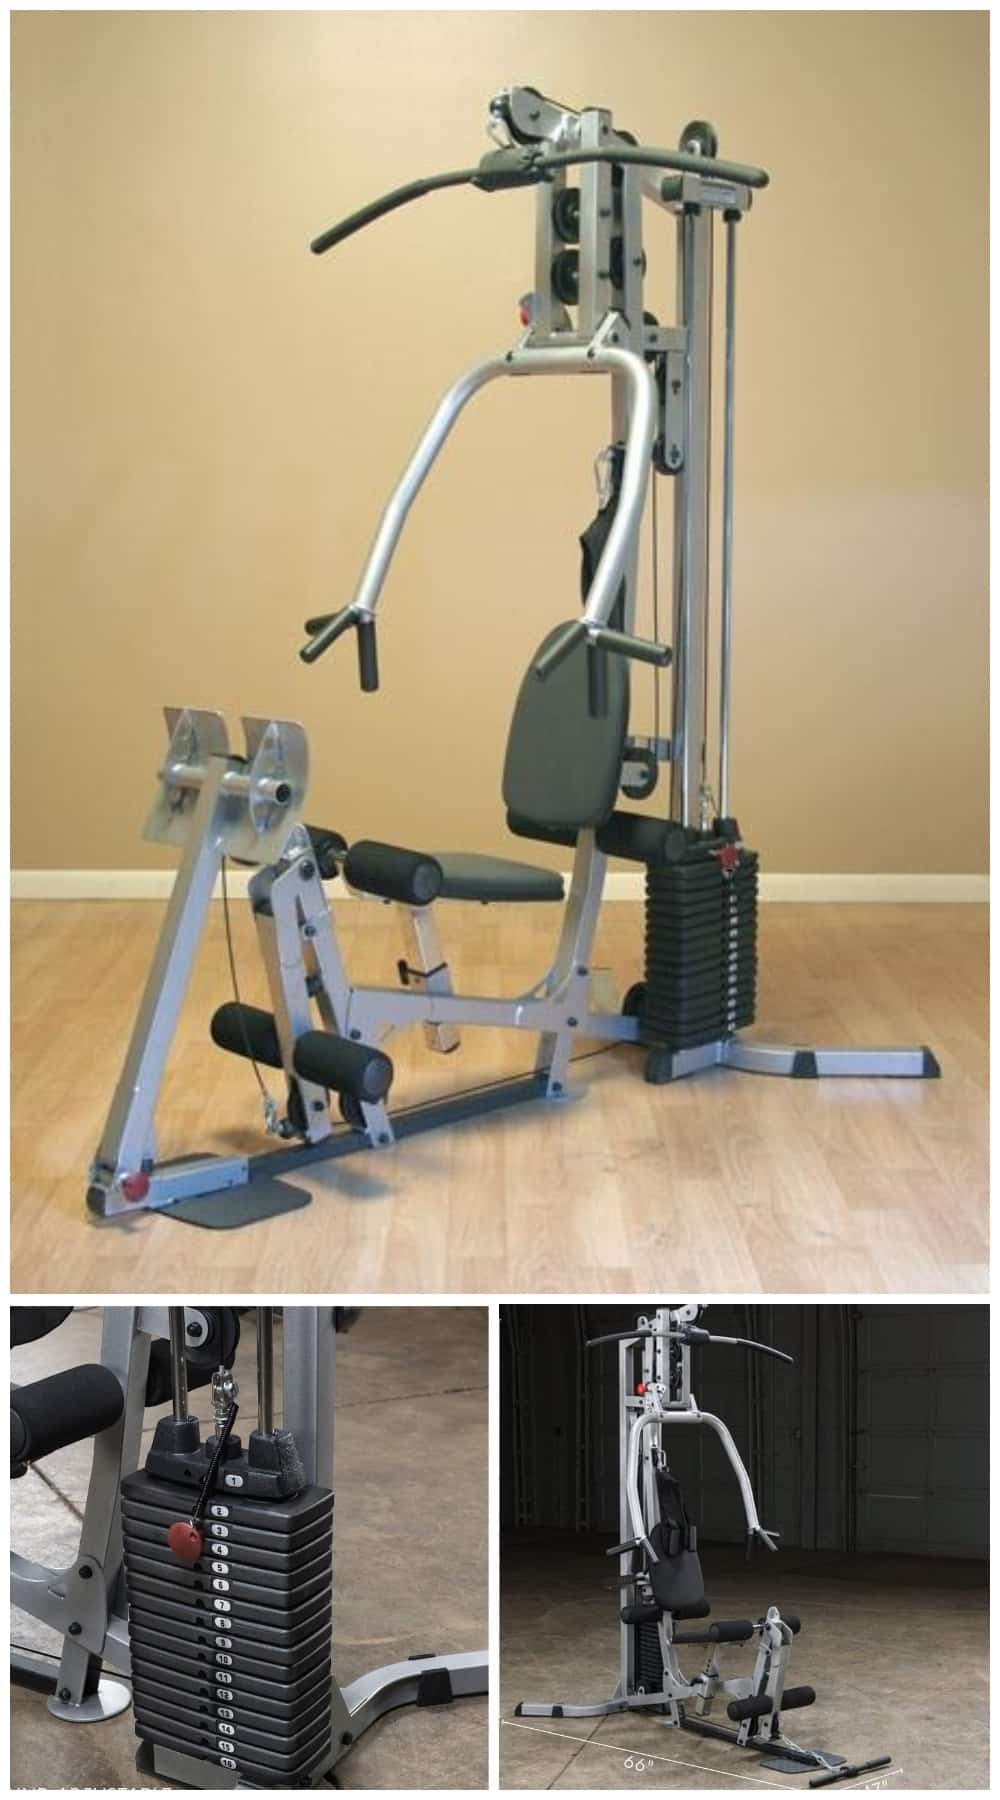 best overall exercise equipment for home